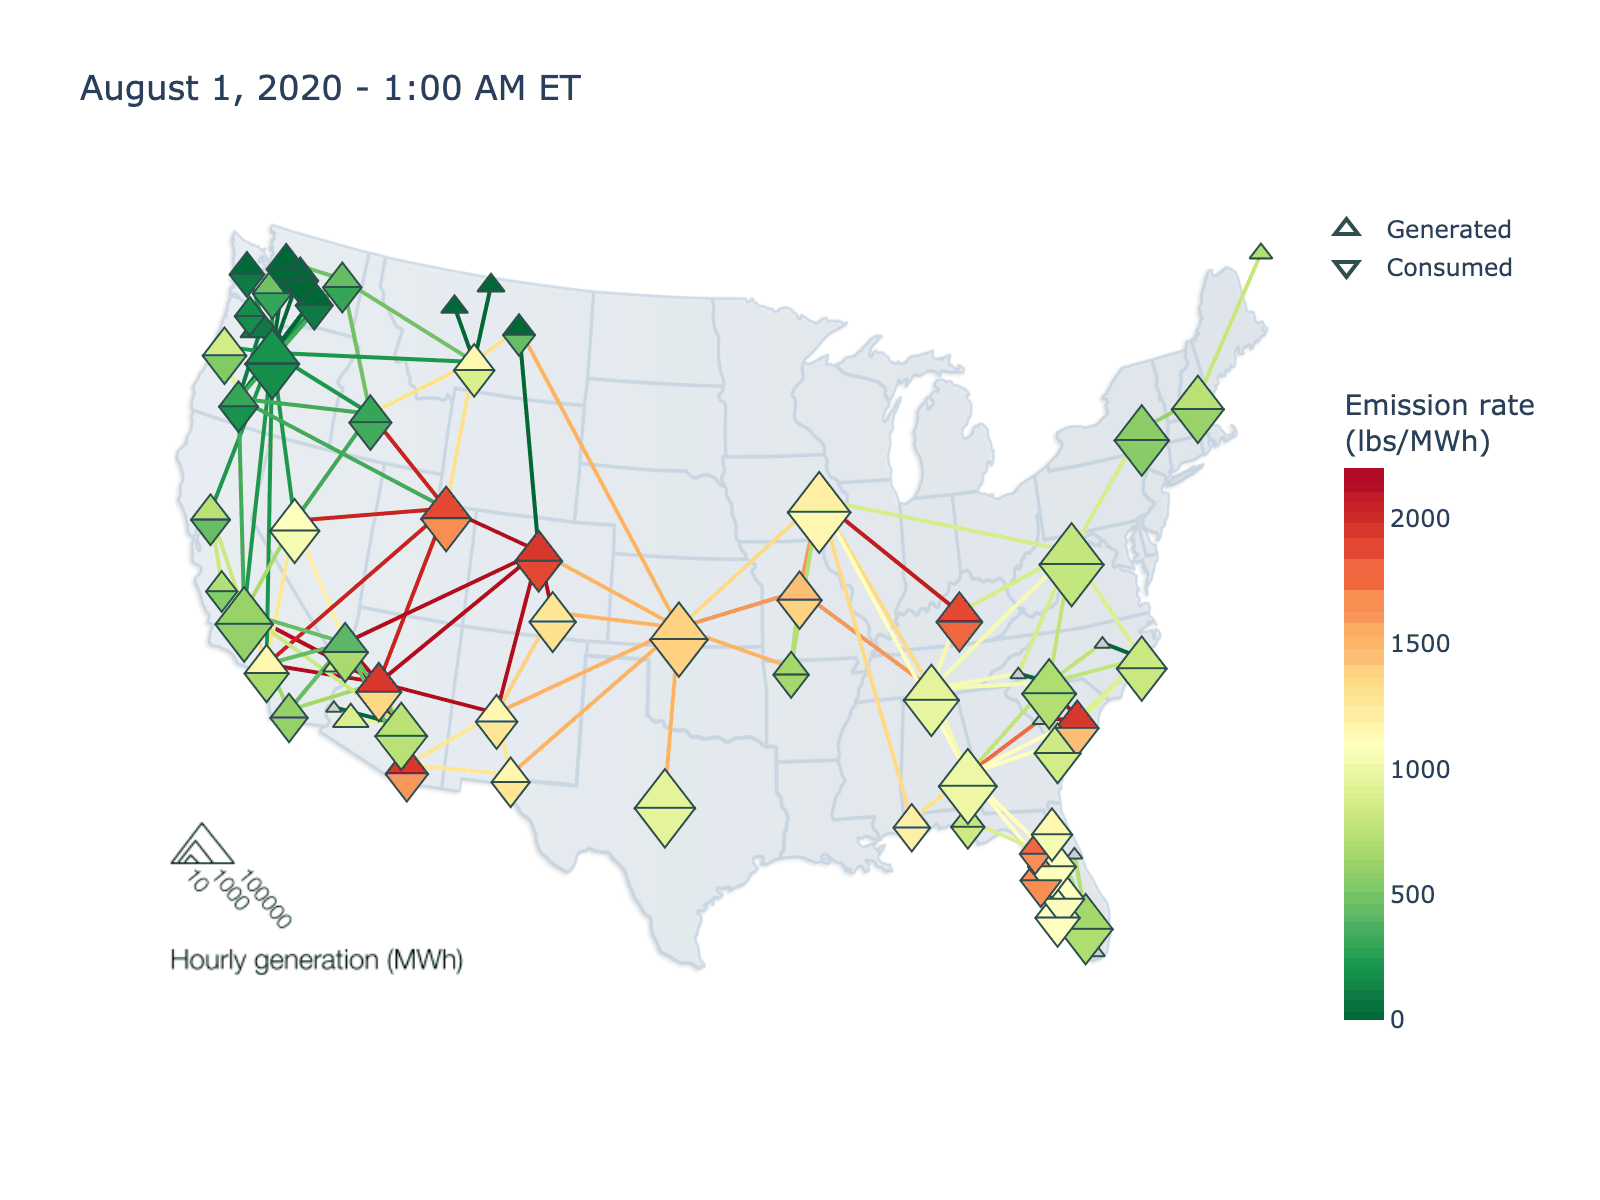 Animation of hourly regional carbon intensities over one day in the US